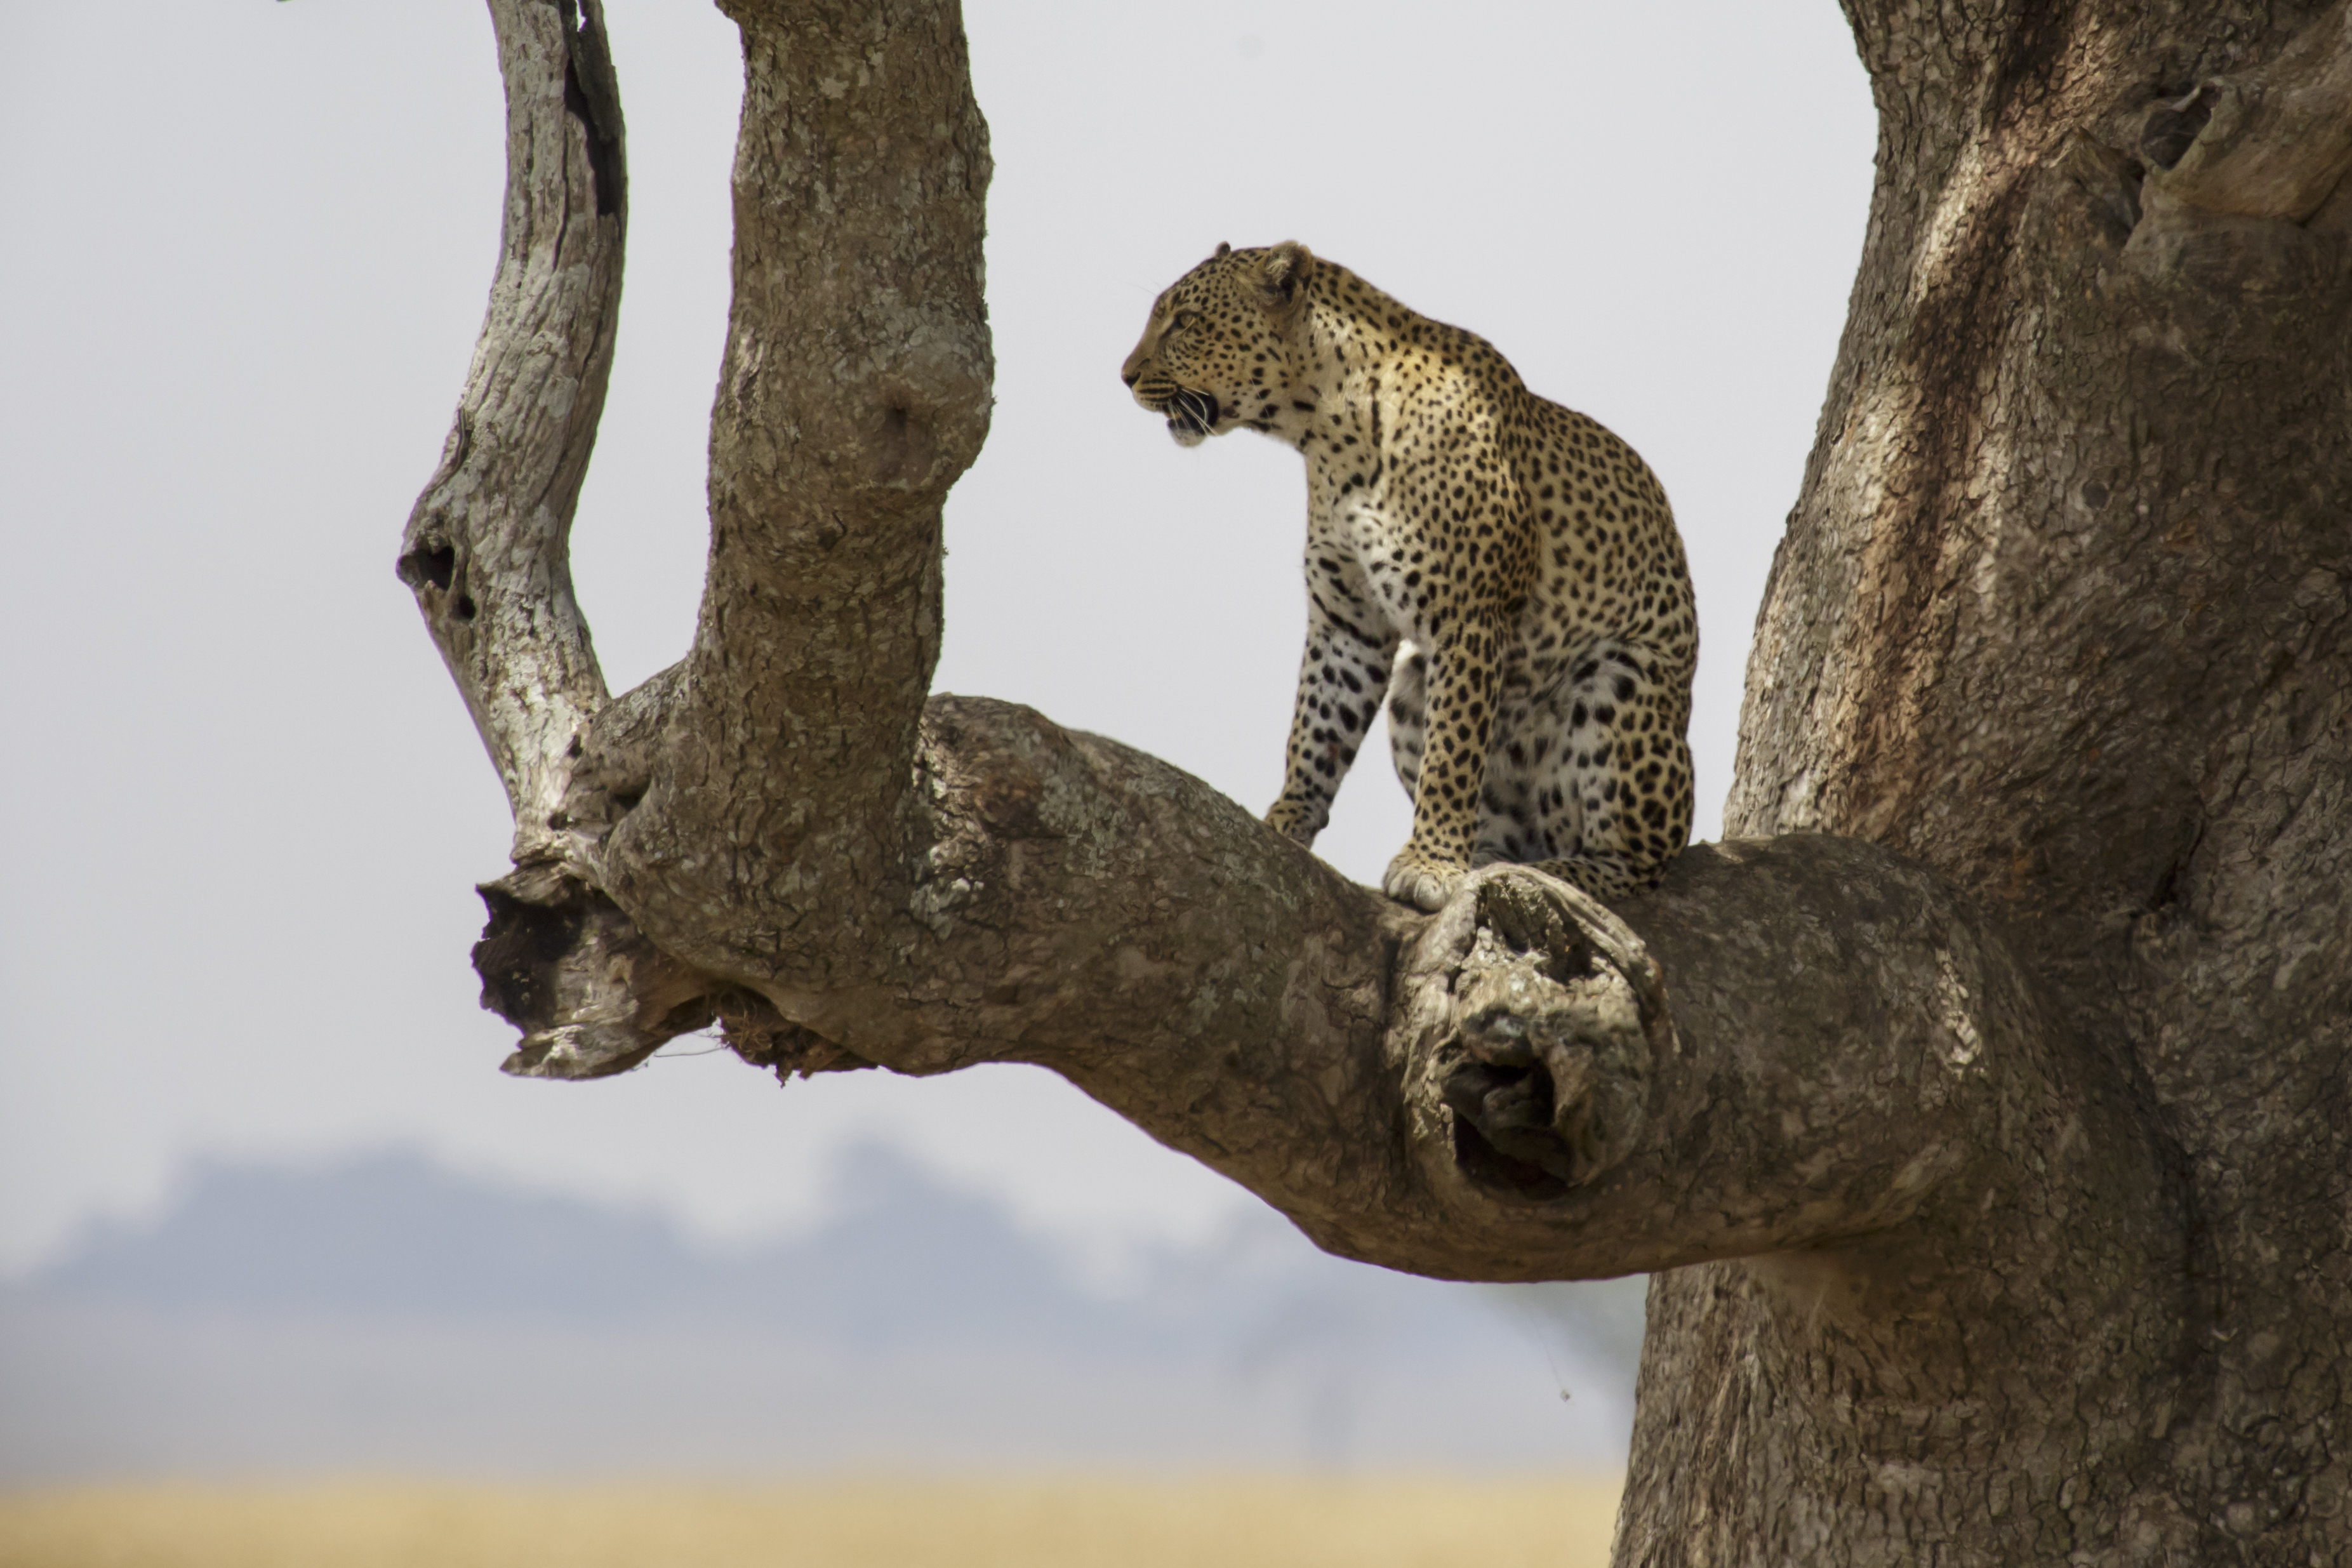 Image Slider No: 3 Embark on a Thrilling Big Five Safari in Tanzania with Lindo Travel & Tours